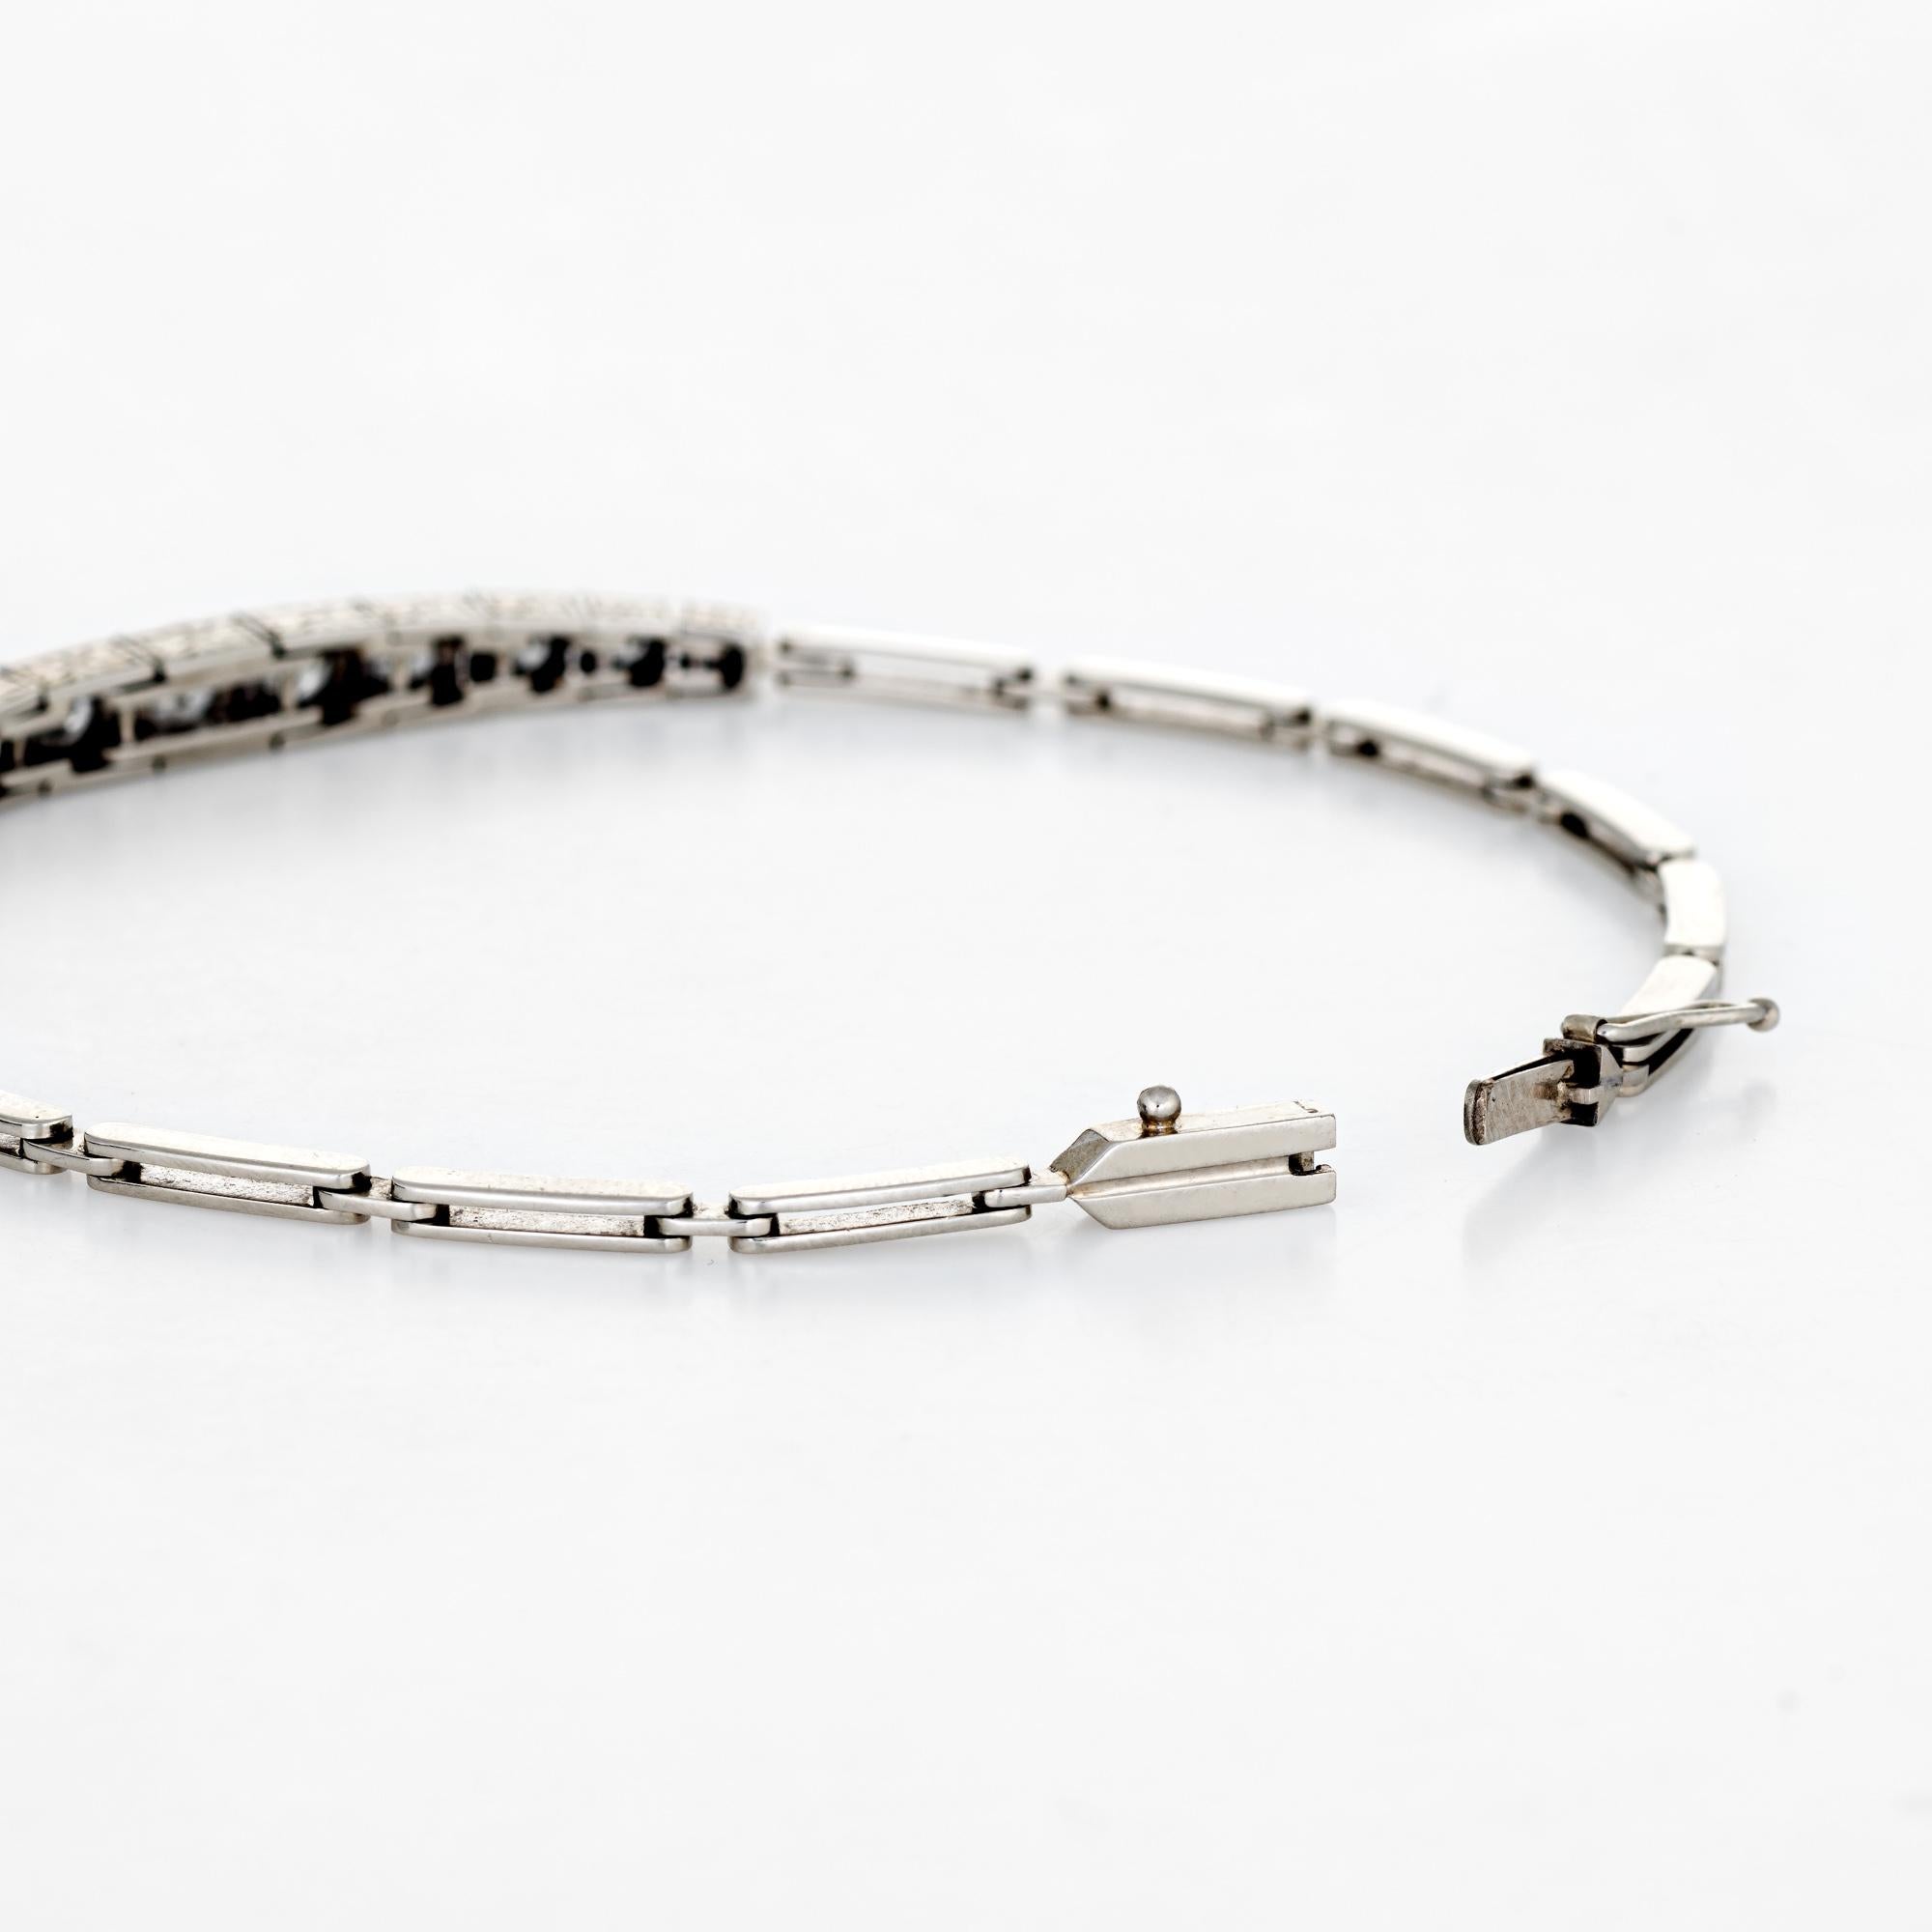 Stylish and elegant vintage Art Deco era bracelet (circa 1920s to 1930s), crafted in 14 karat white gold. 

Round brilliant cut diamonds graduate in size and total an estimated 1.15 carats (estimated at H-I color and VS2-SI1 clarity). 

The bracelet